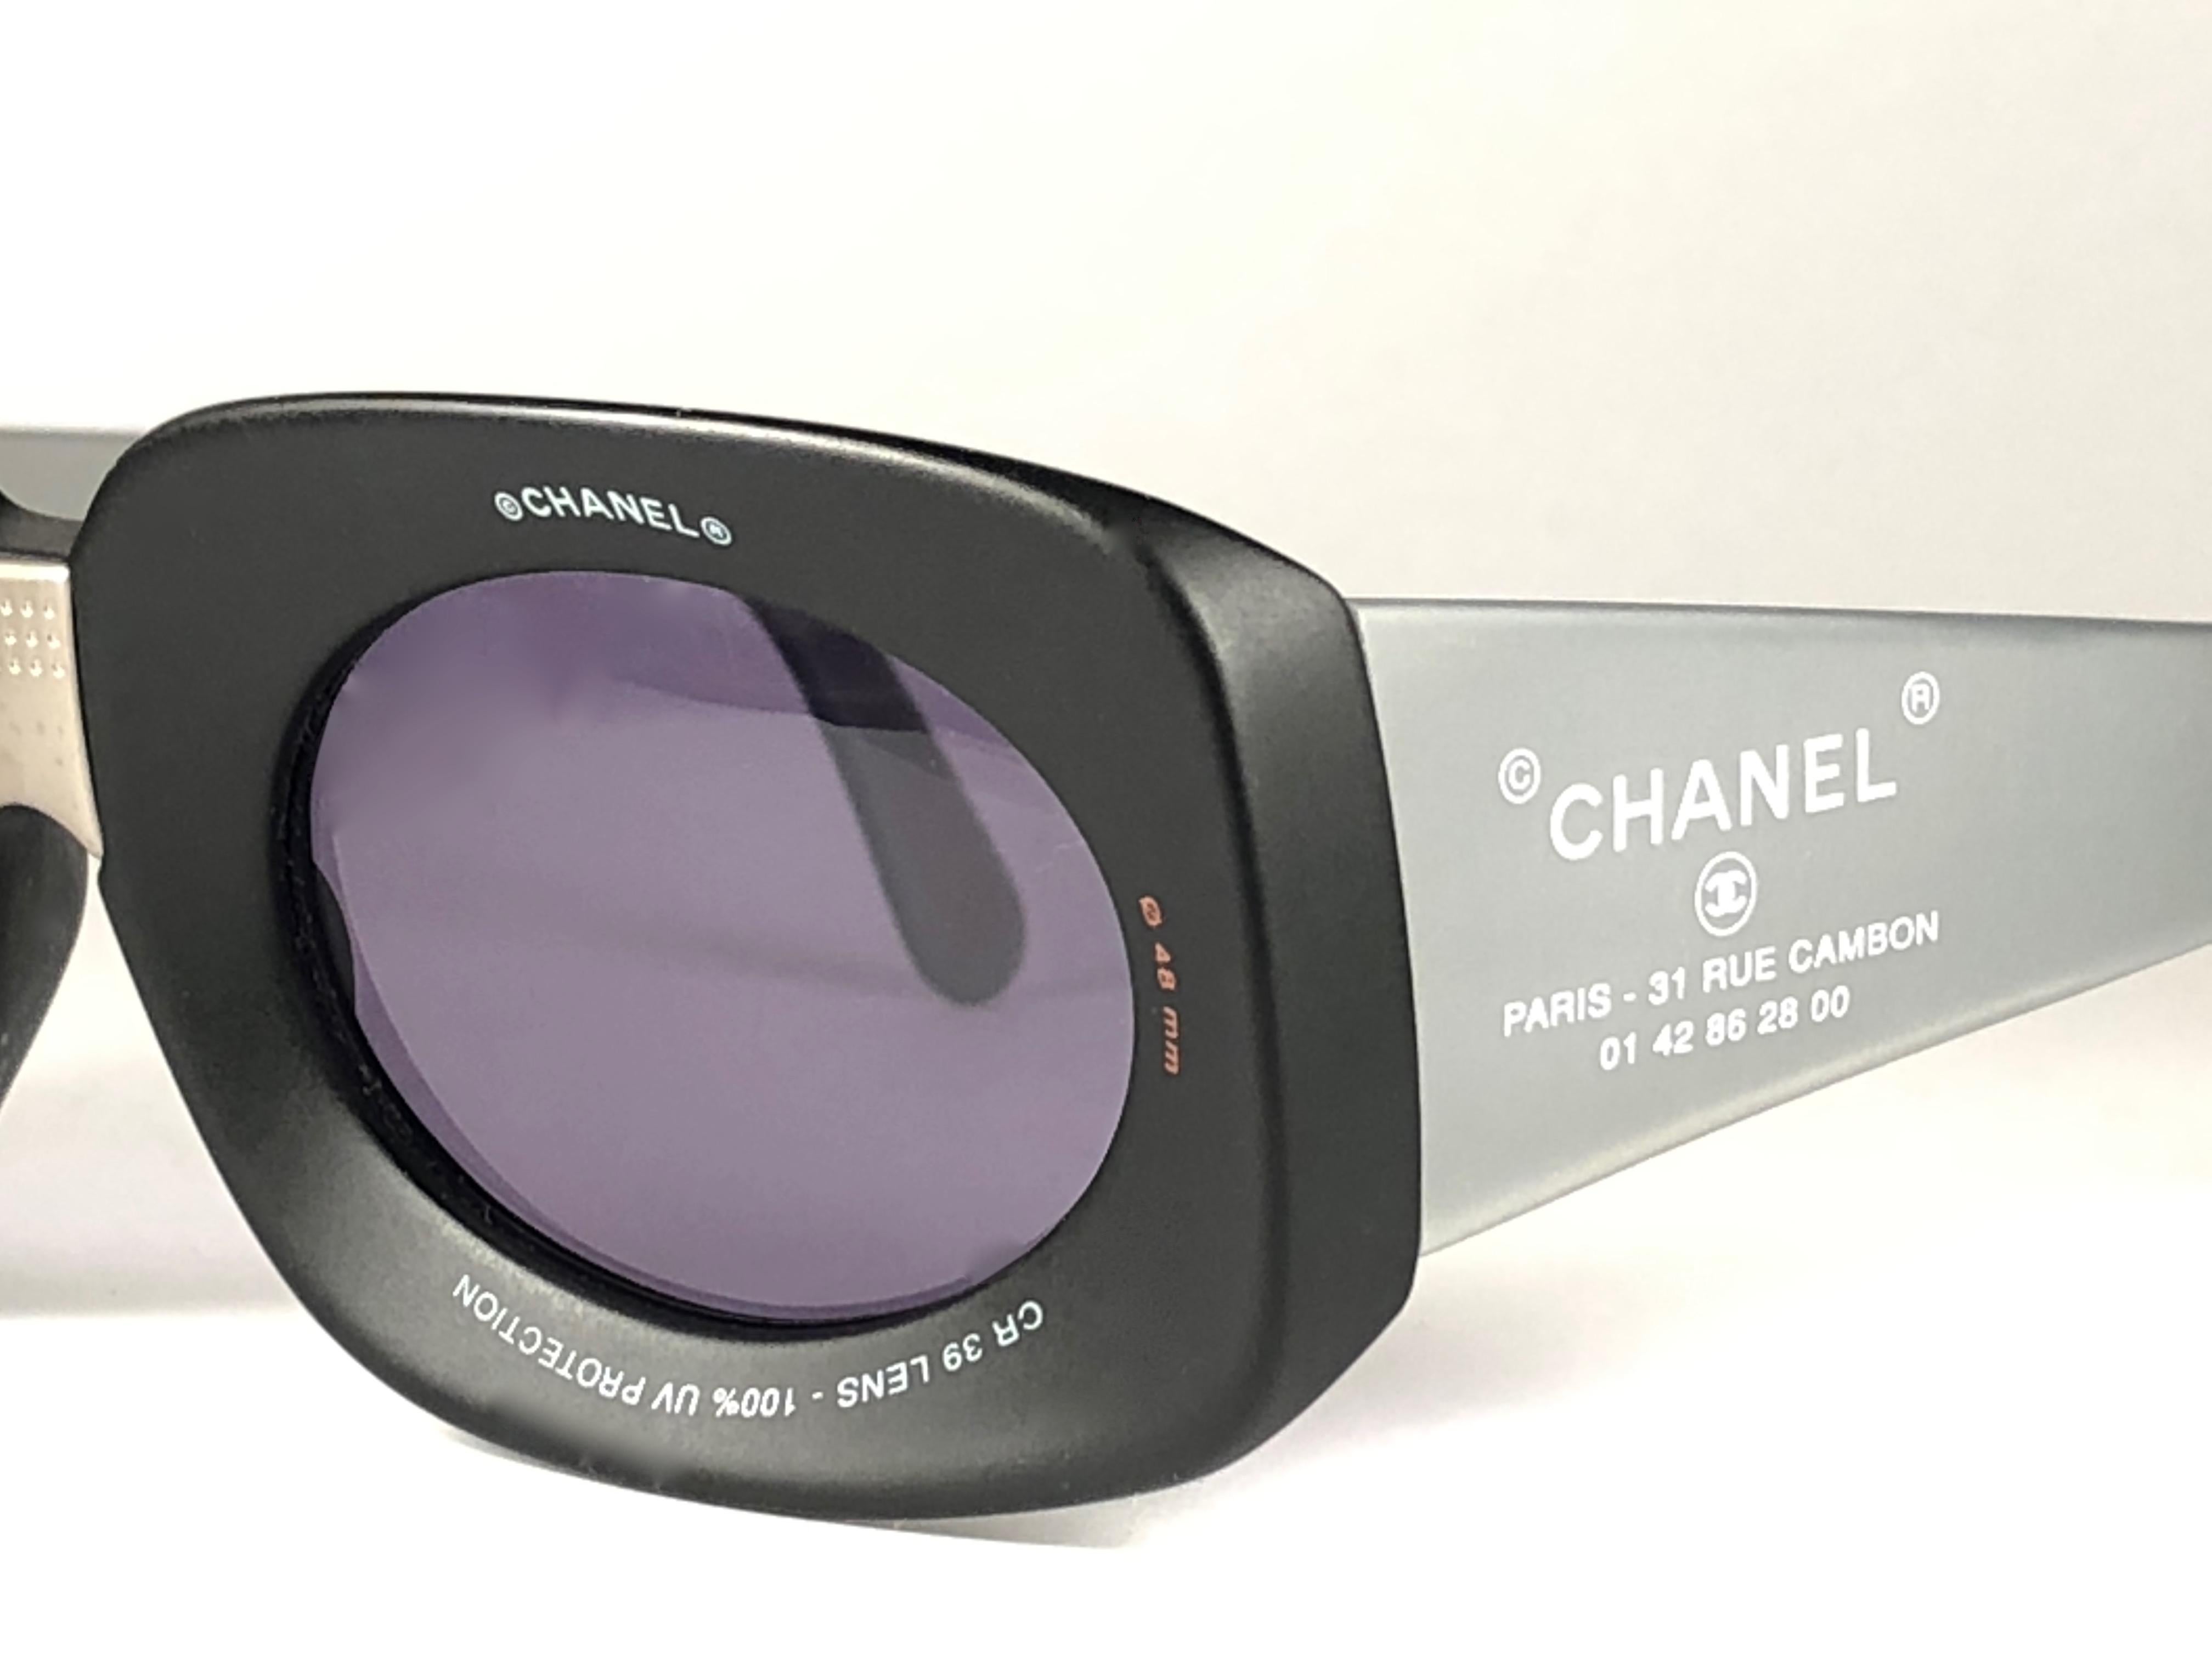 Chanel Vintage Camera Lens Black & Grey Sunglasses Made in Italy Collector Item In New Condition For Sale In Baleares, Baleares